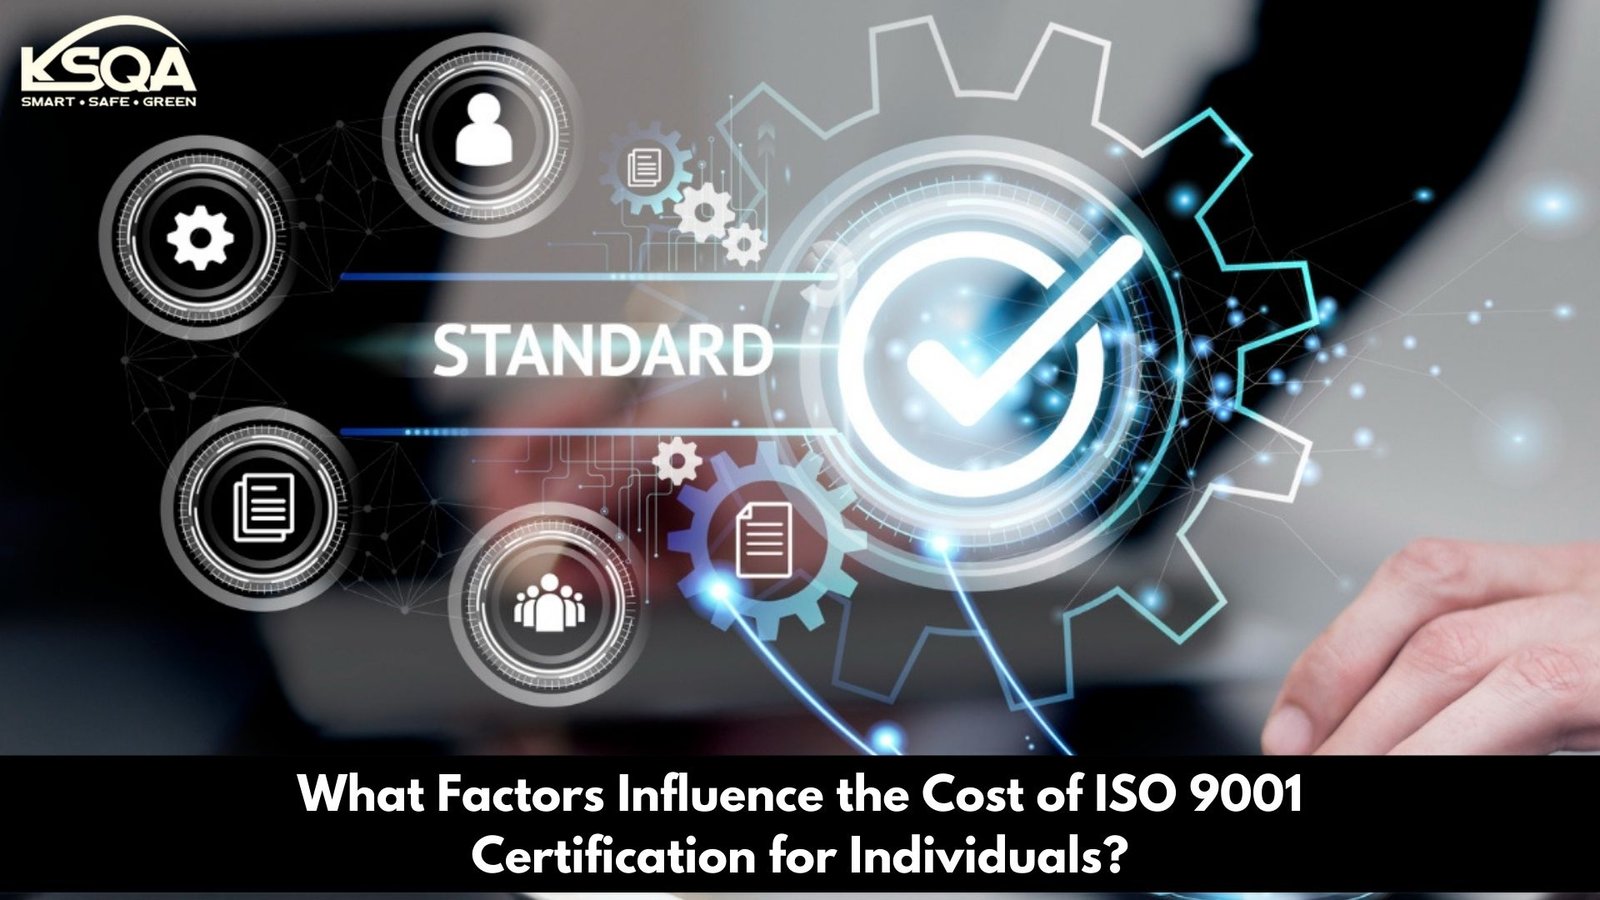 What Factors Influence the Cost of ISO 9001 Certification for Individuals?